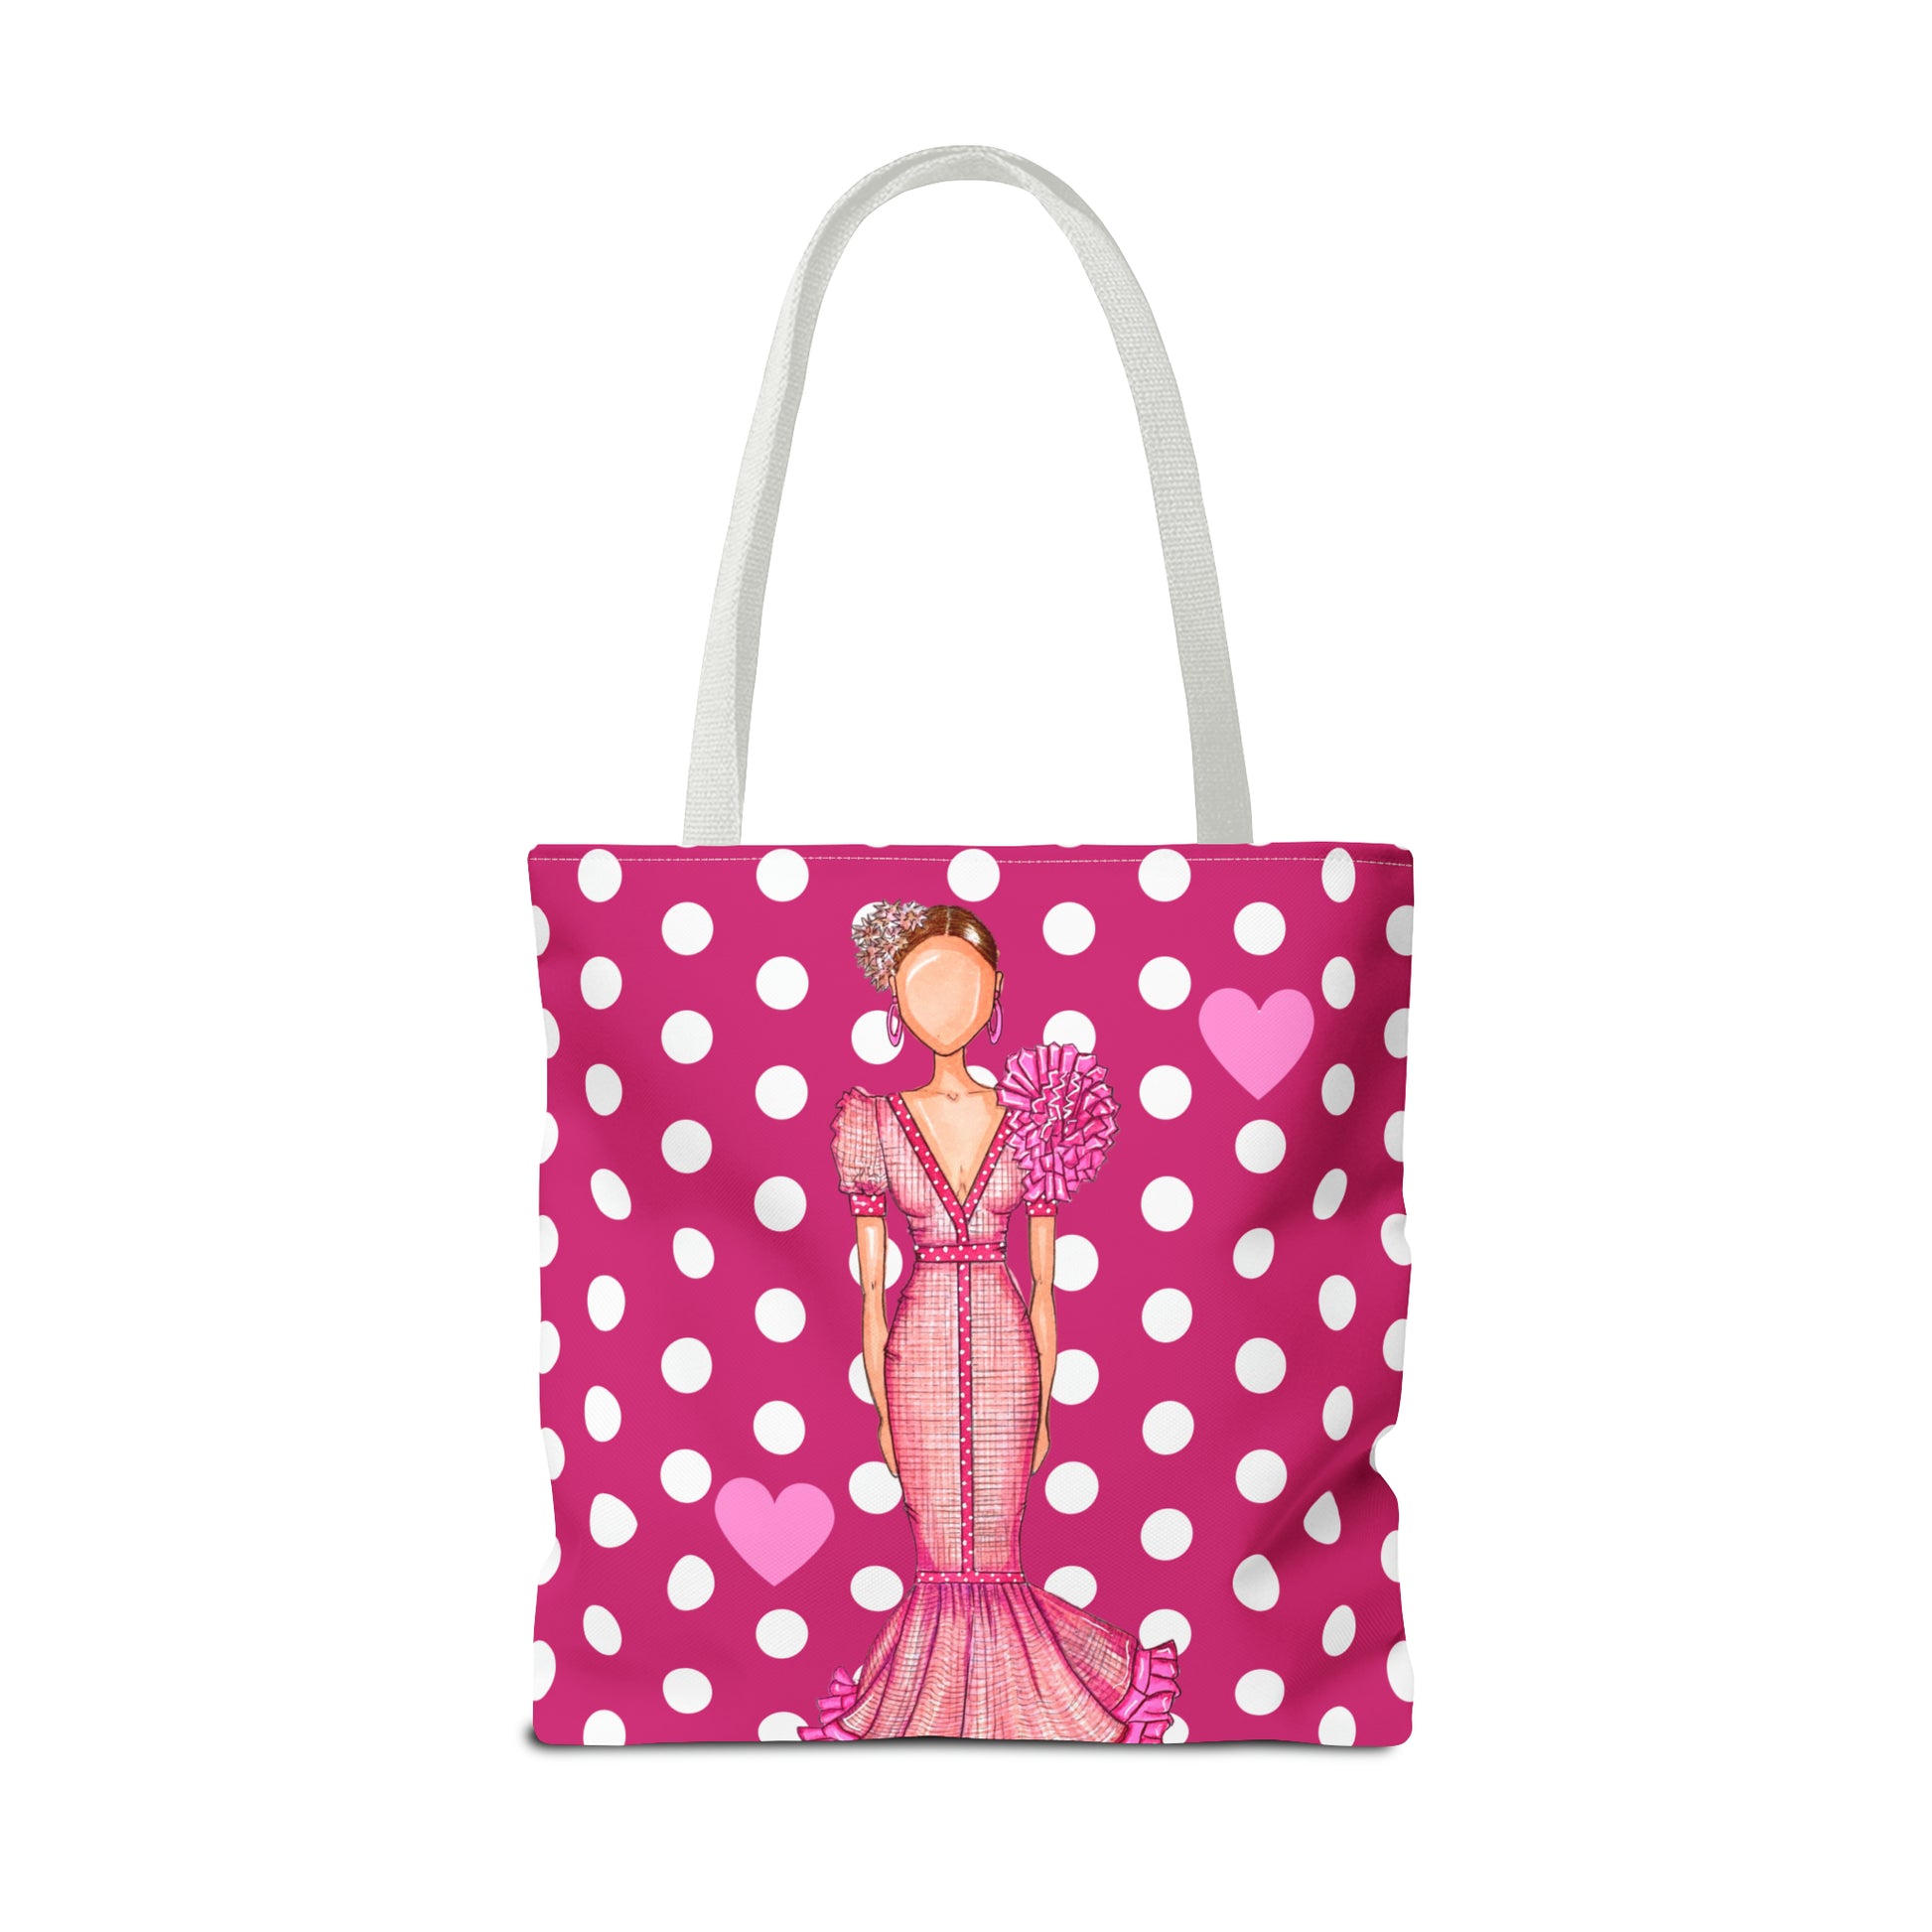 a pink and white polka dot bag with a picture of a woman in a dress